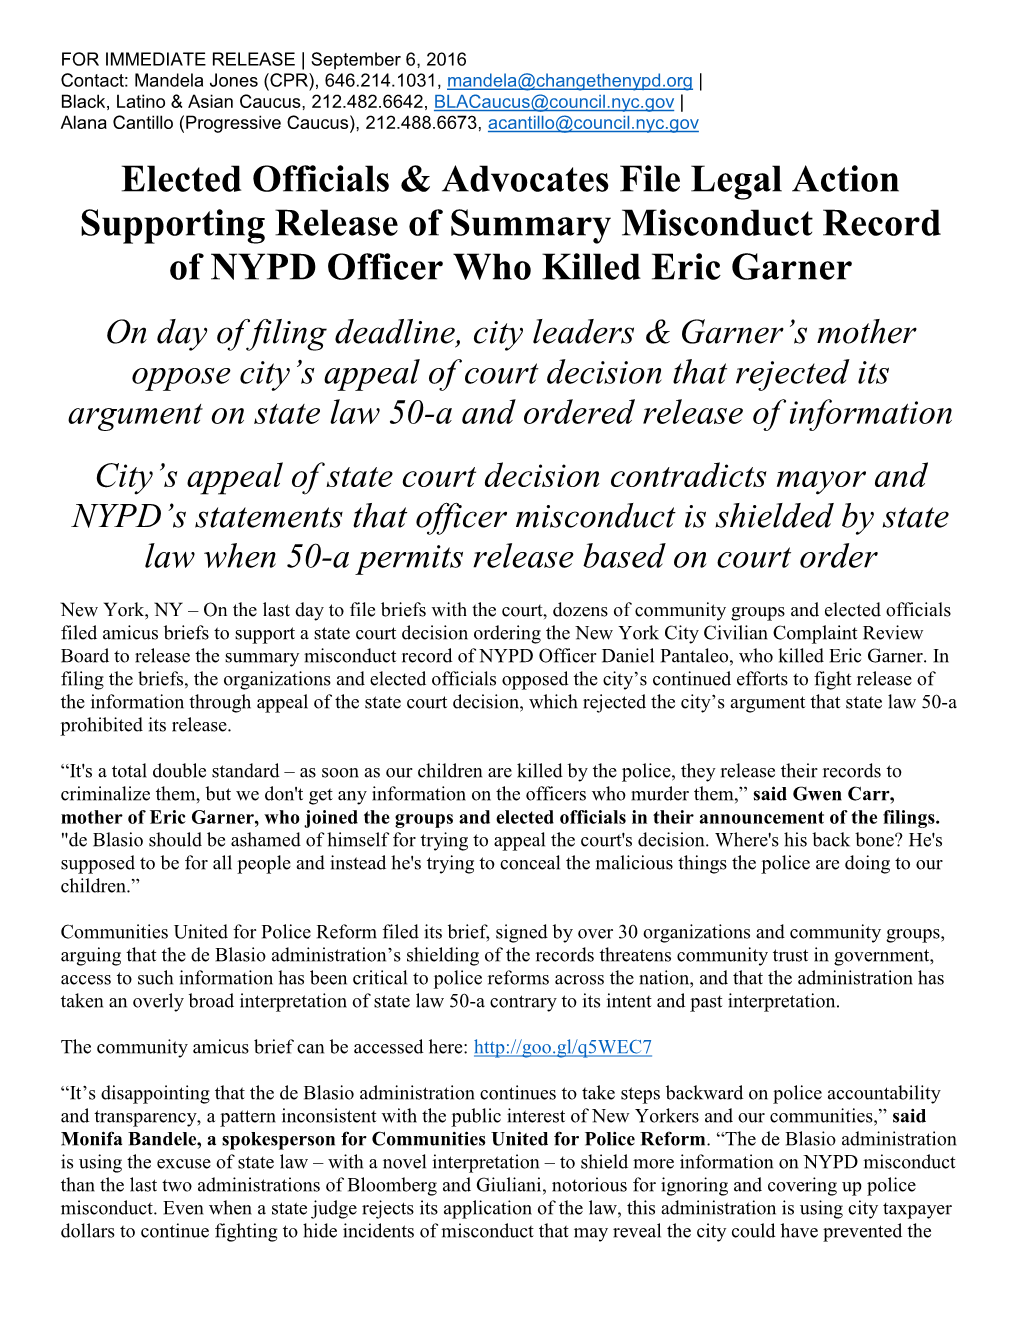 Elected Officials & Advocates File Legal Action Supporting Release Of